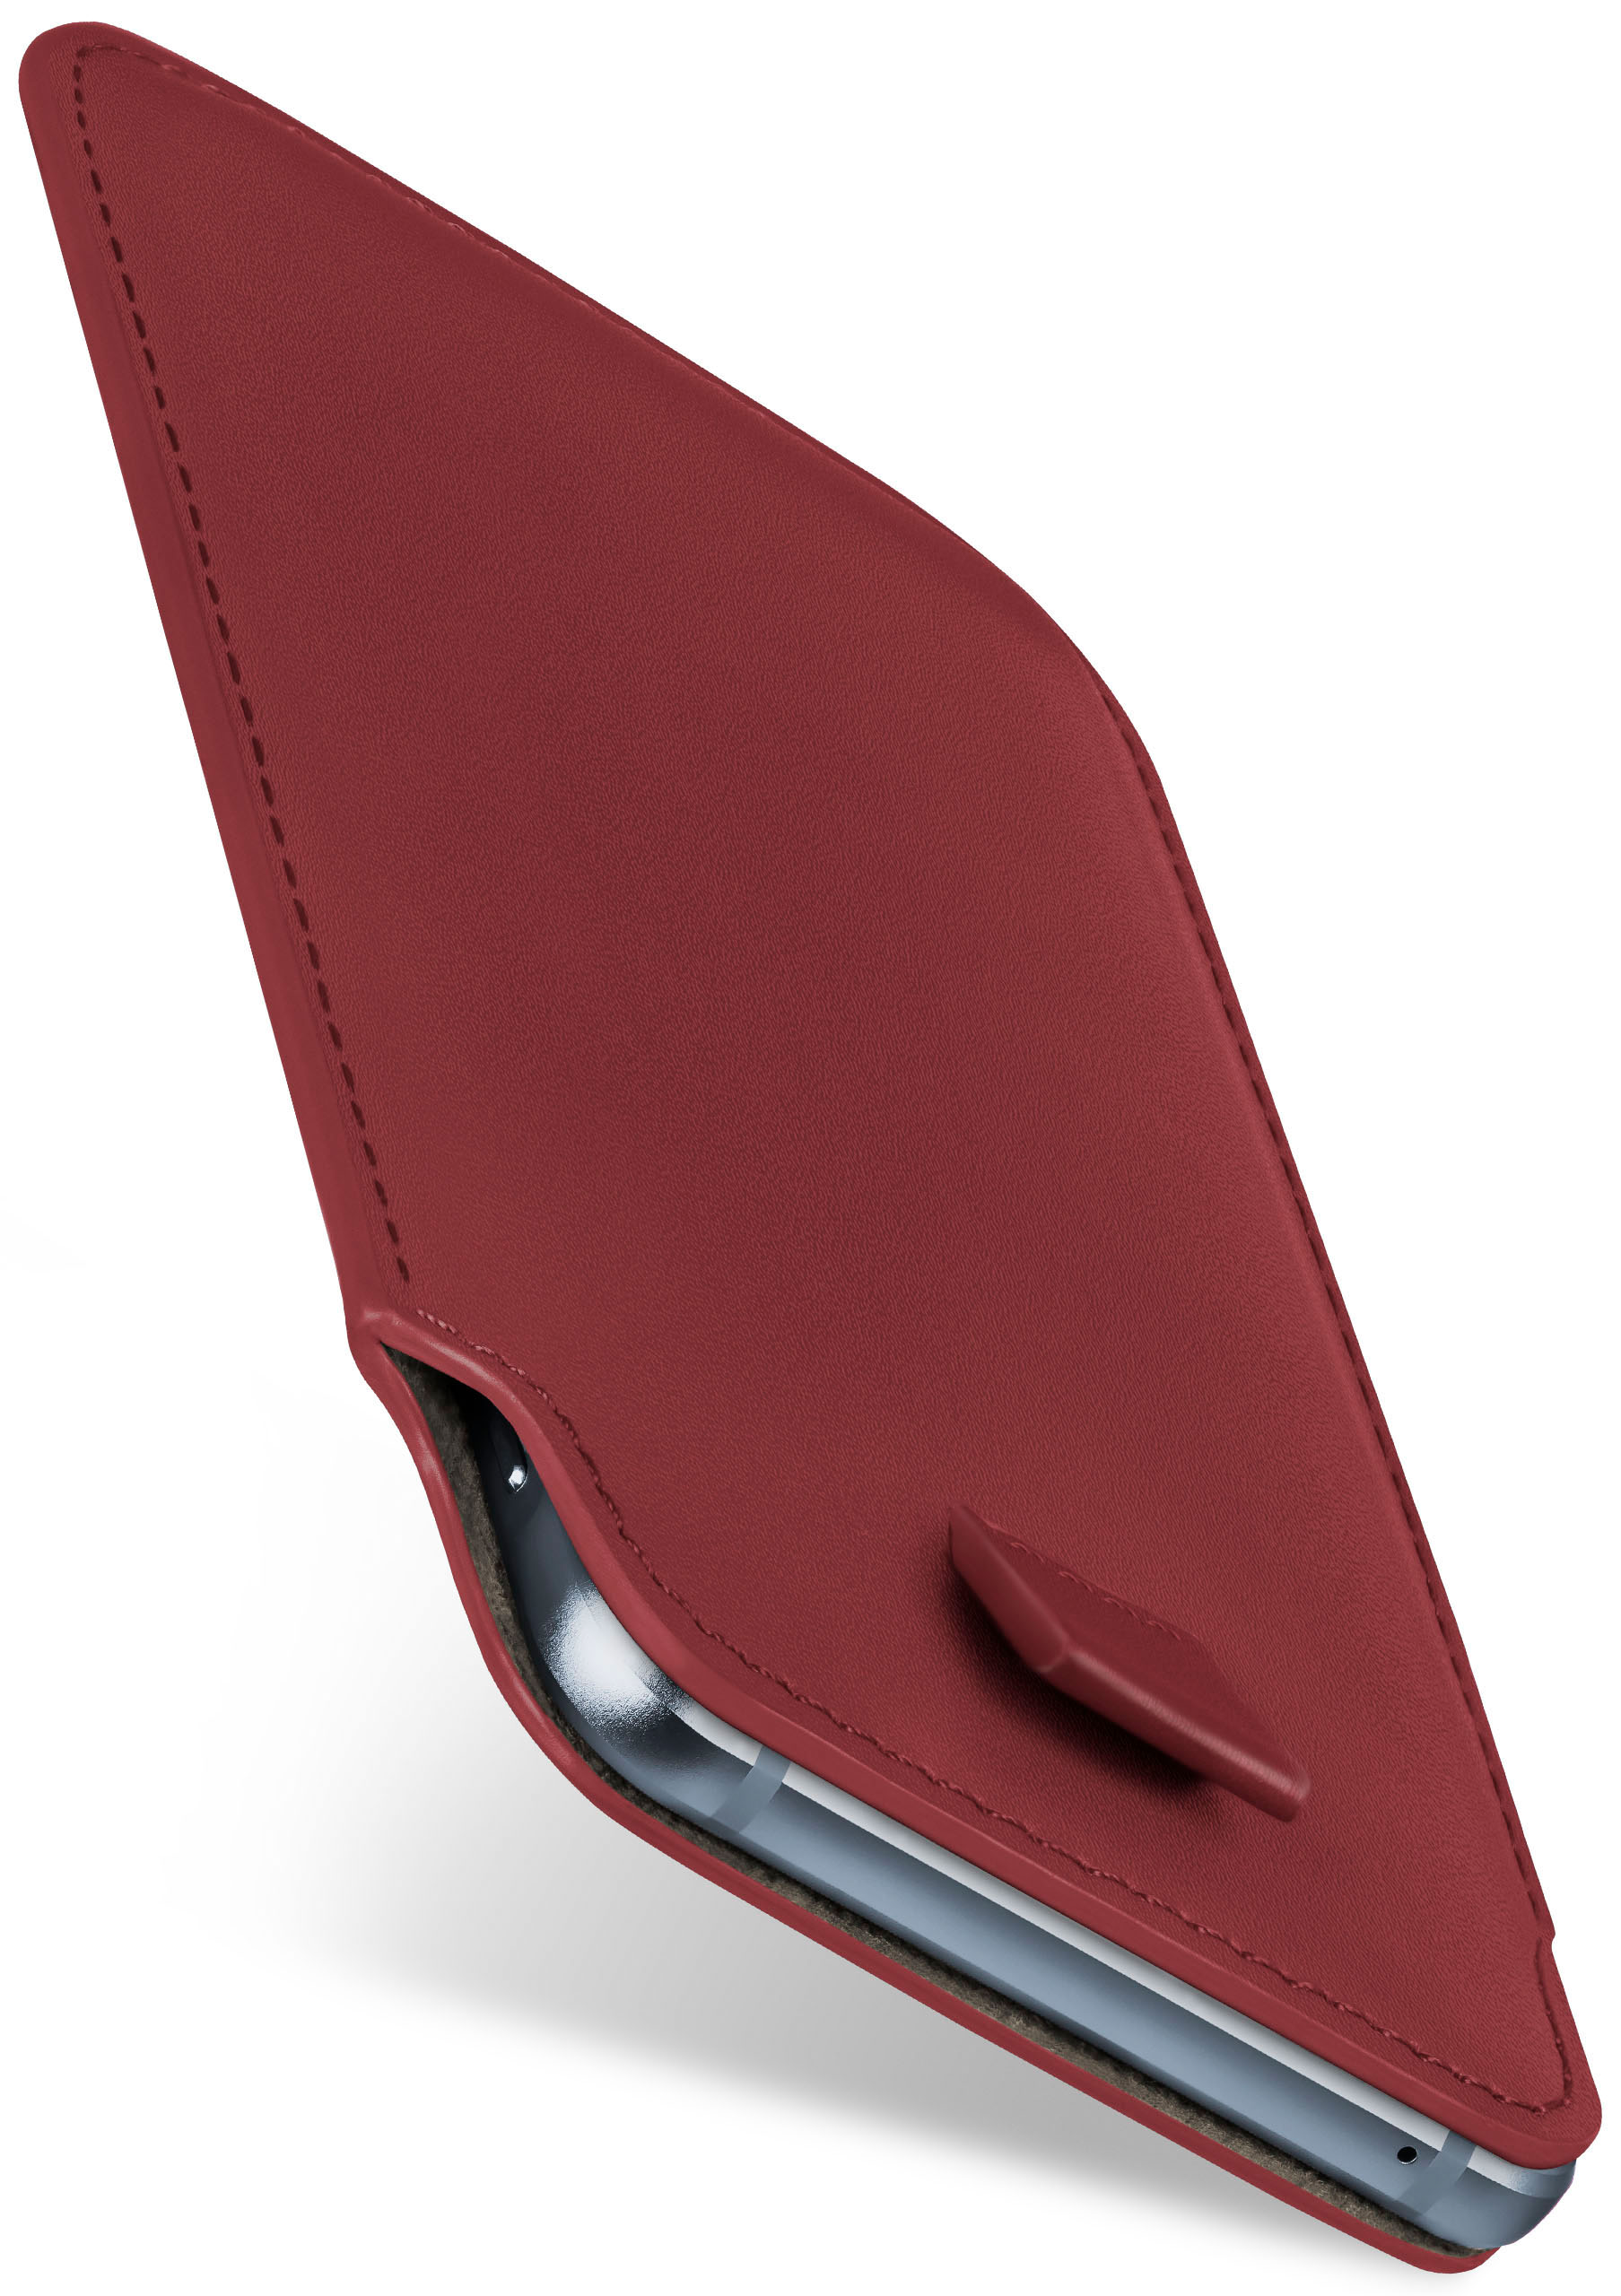 MOEX Slide Case, Full One, Cover, Maroon-Red OnePlus